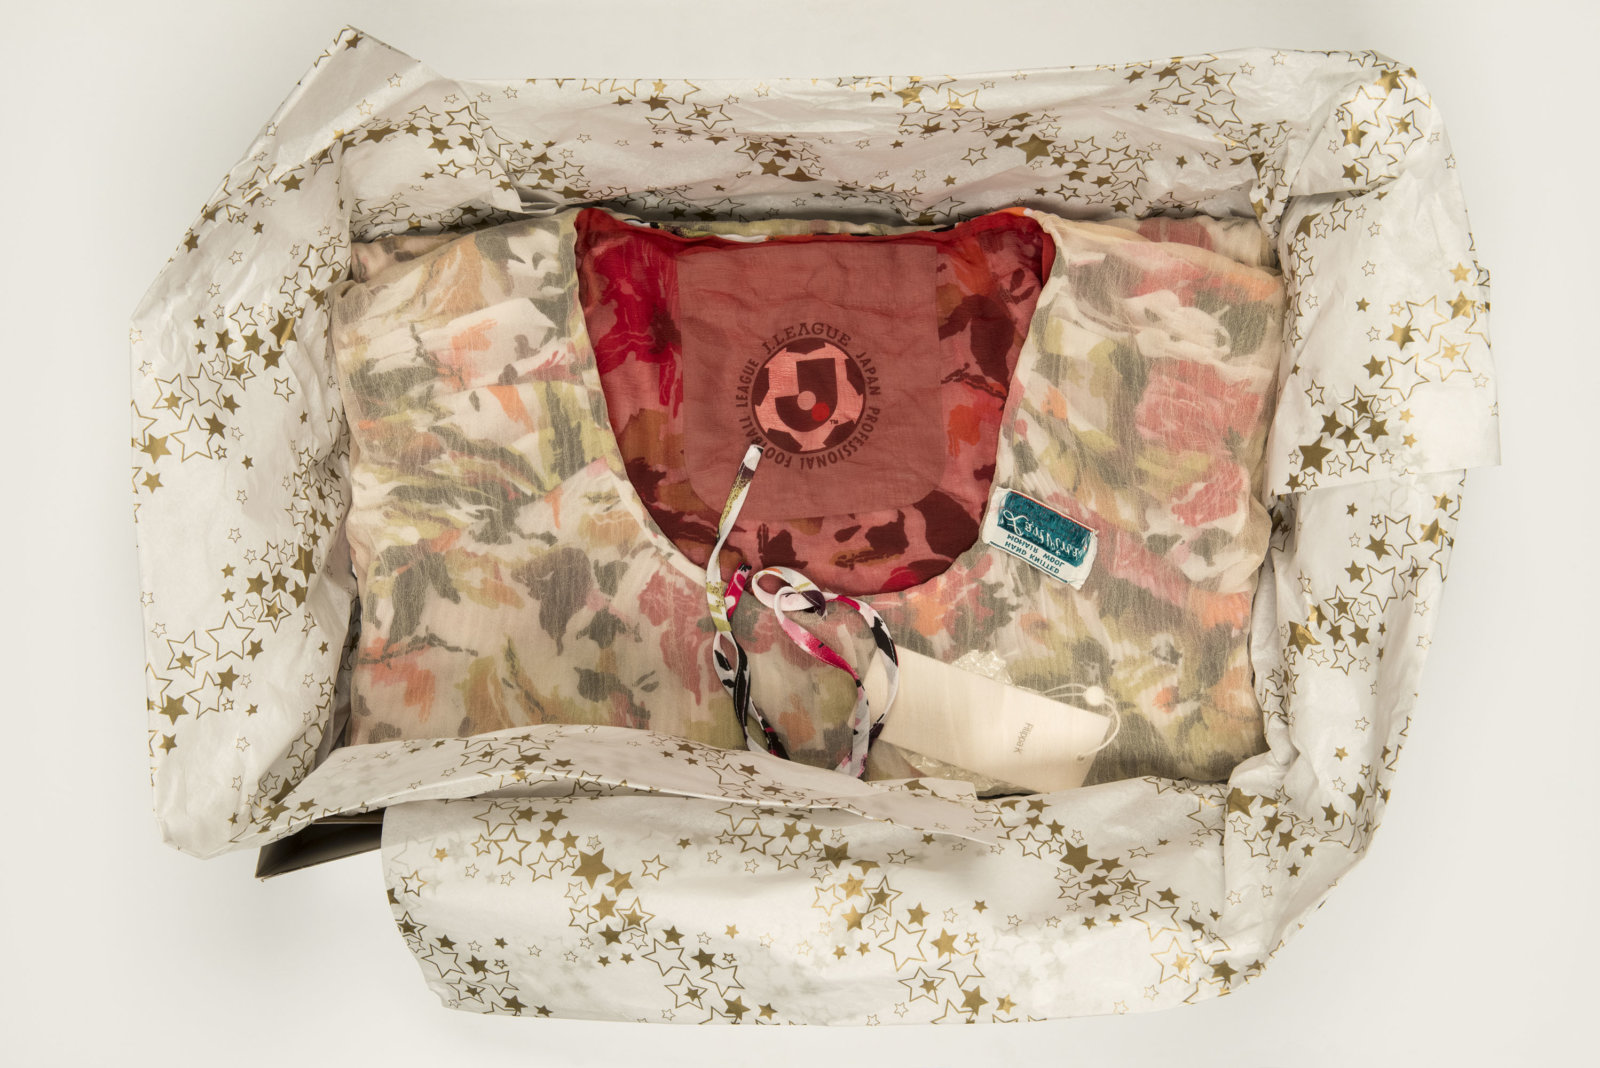 Liz Magor, Being This (J League Japan), 2012, paper, textiles, found materials, 12 x 19 x 3 in. (31 x 48 x 8 cm)